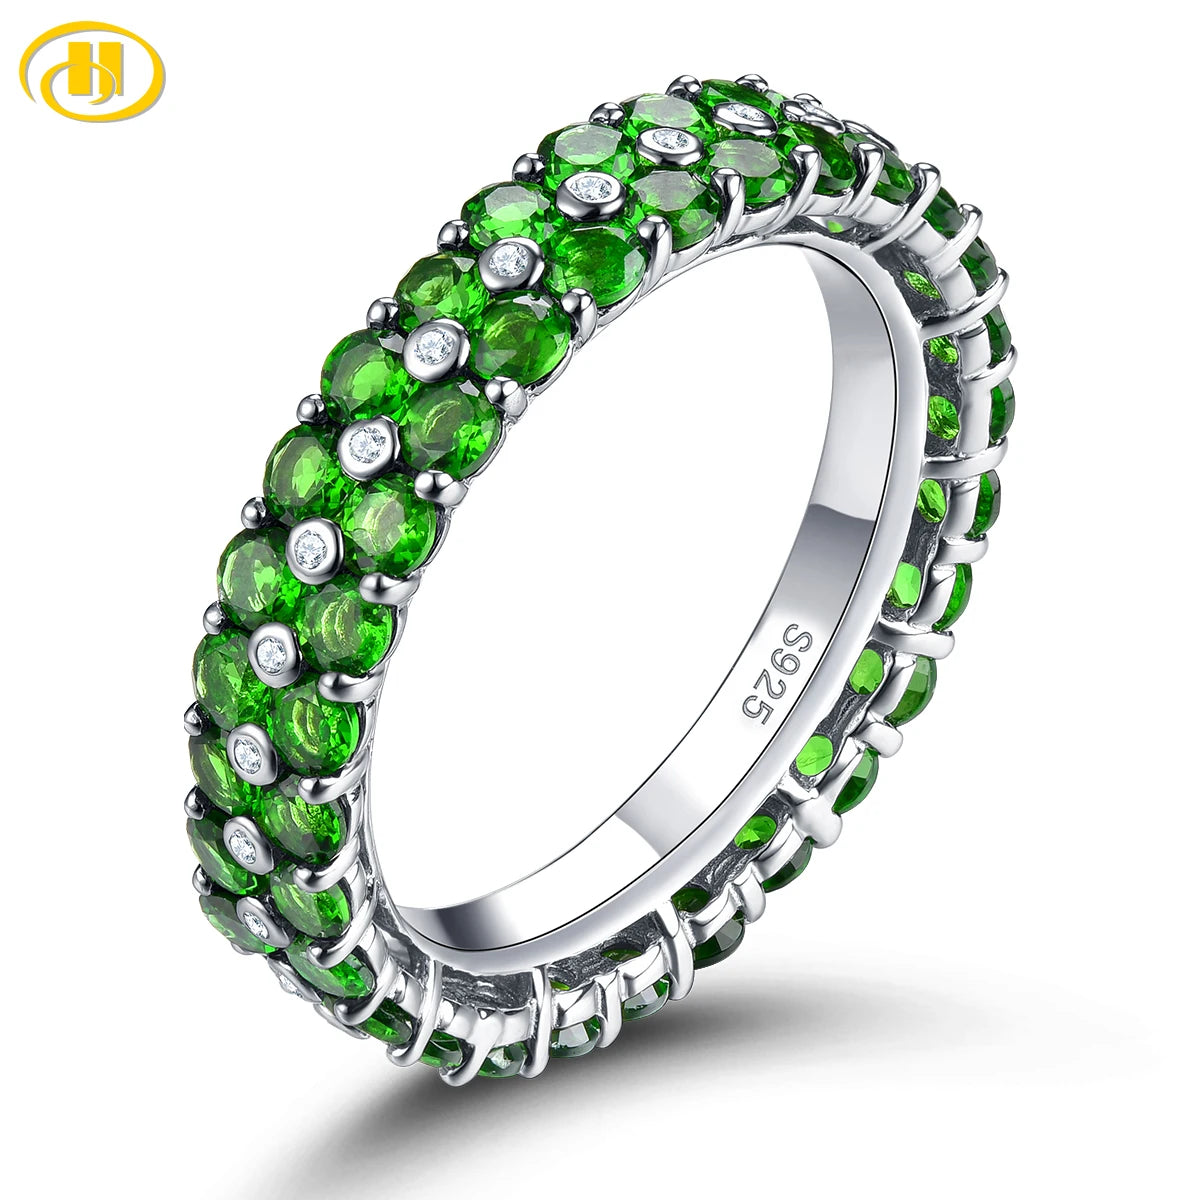 Natural Black Spinel Silver Rings 5.5 Carats Genuine Spinel Classic Fine Jewelry Unisex Style S925 Band Gifts for Birthday Natural Diopside